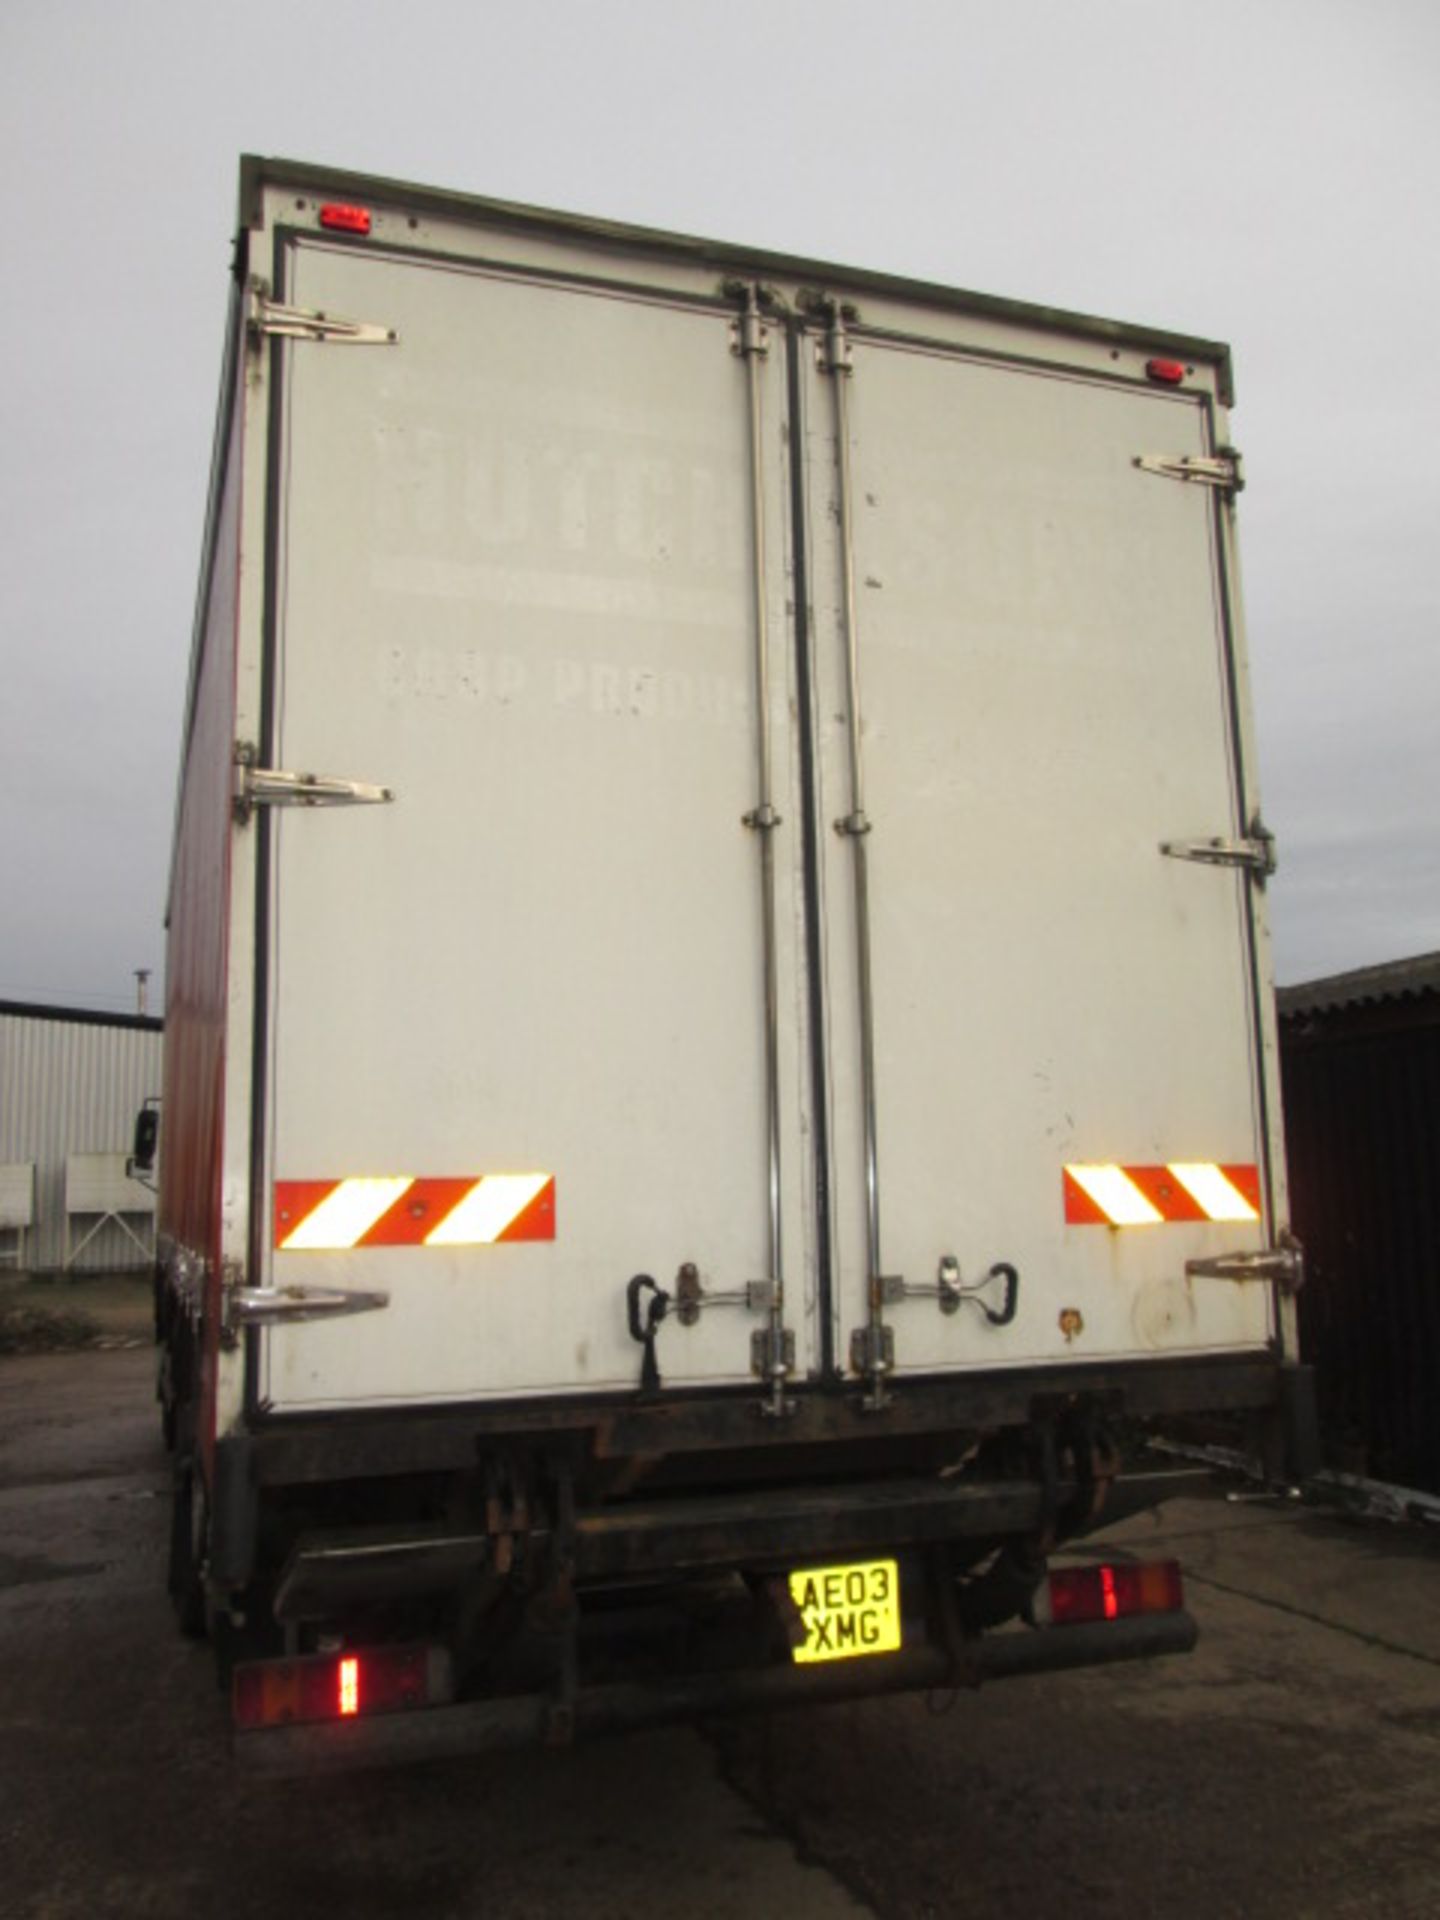 AE03 XMG (2003) Man M2000 White Curtain Side Lorry with Tail Lift. - Image 9 of 14